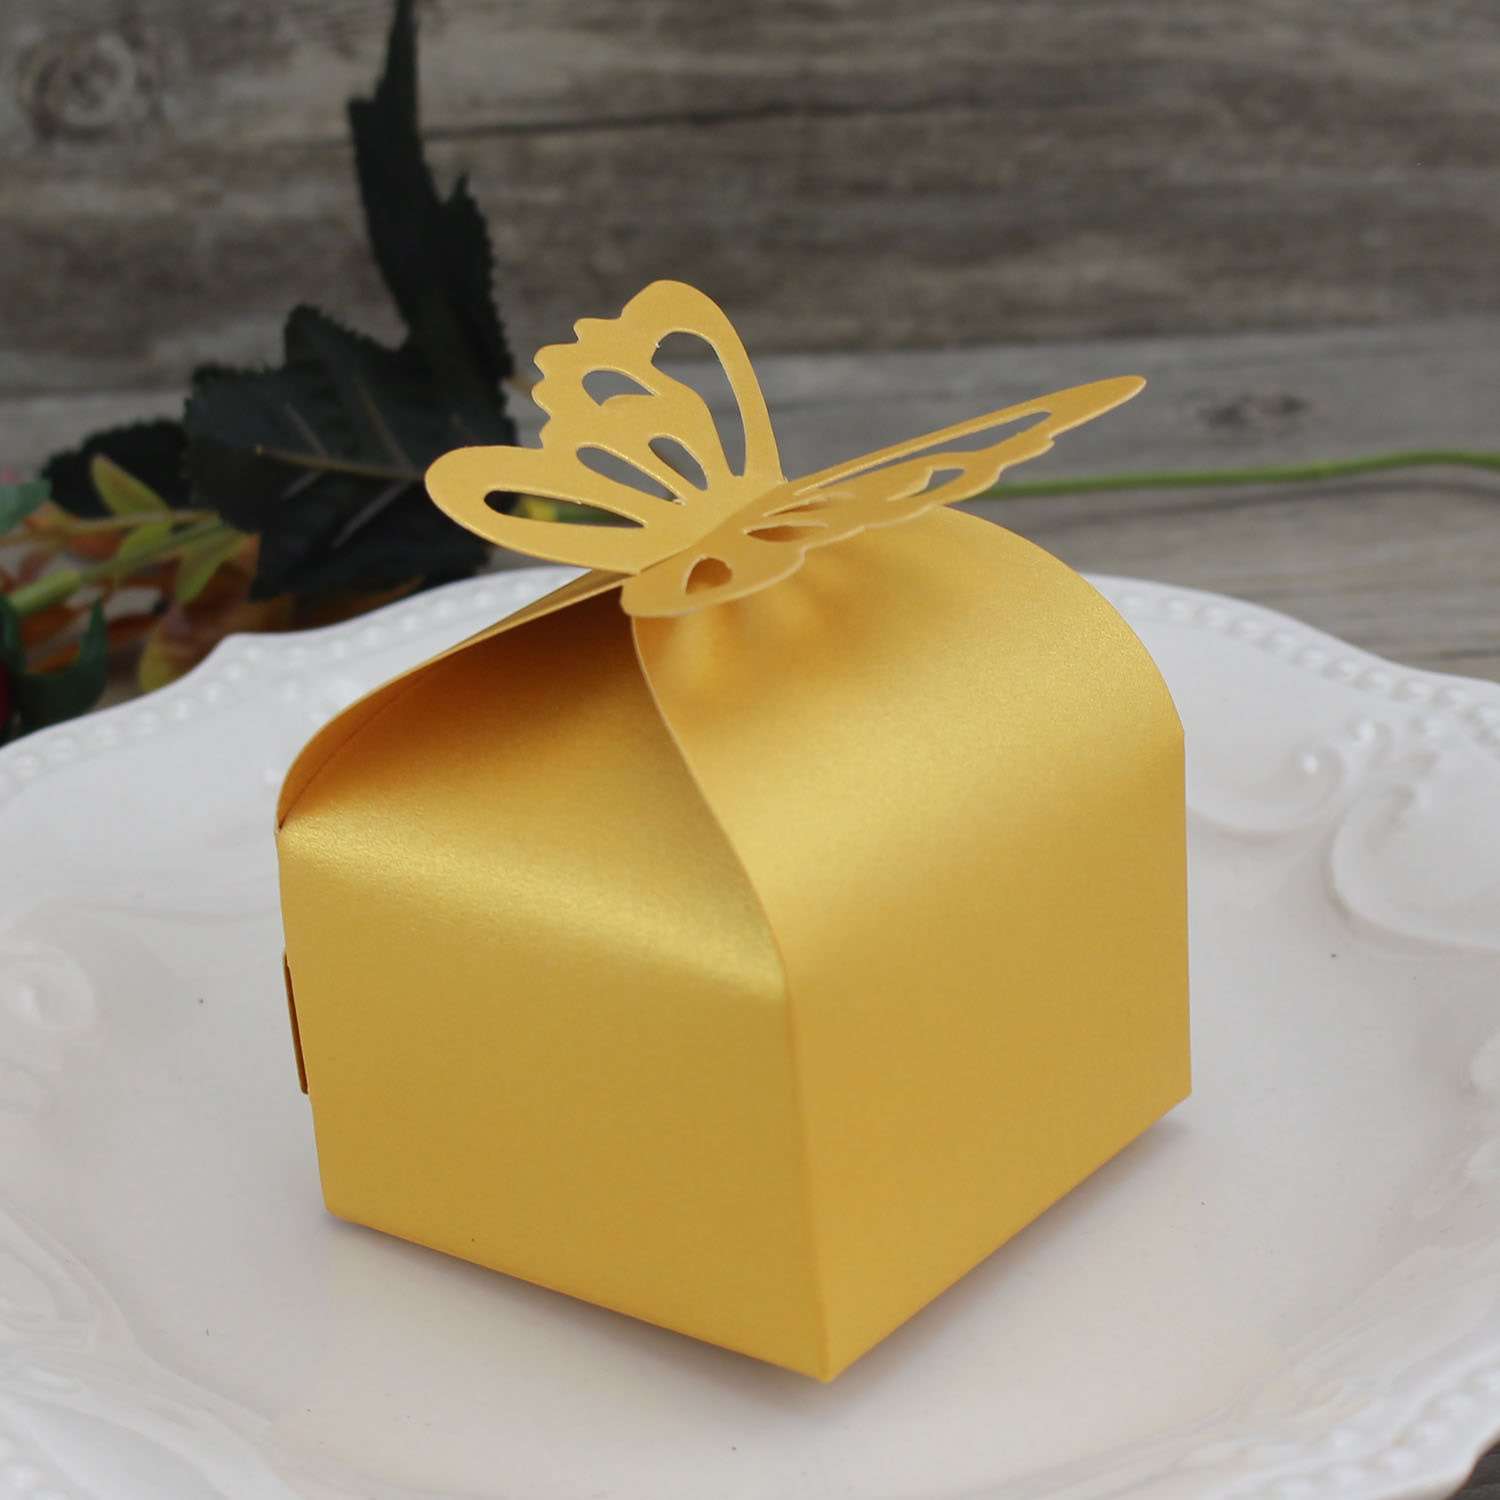 Butterfly Candy Box Iridescent Paper Wedding Box Customized 